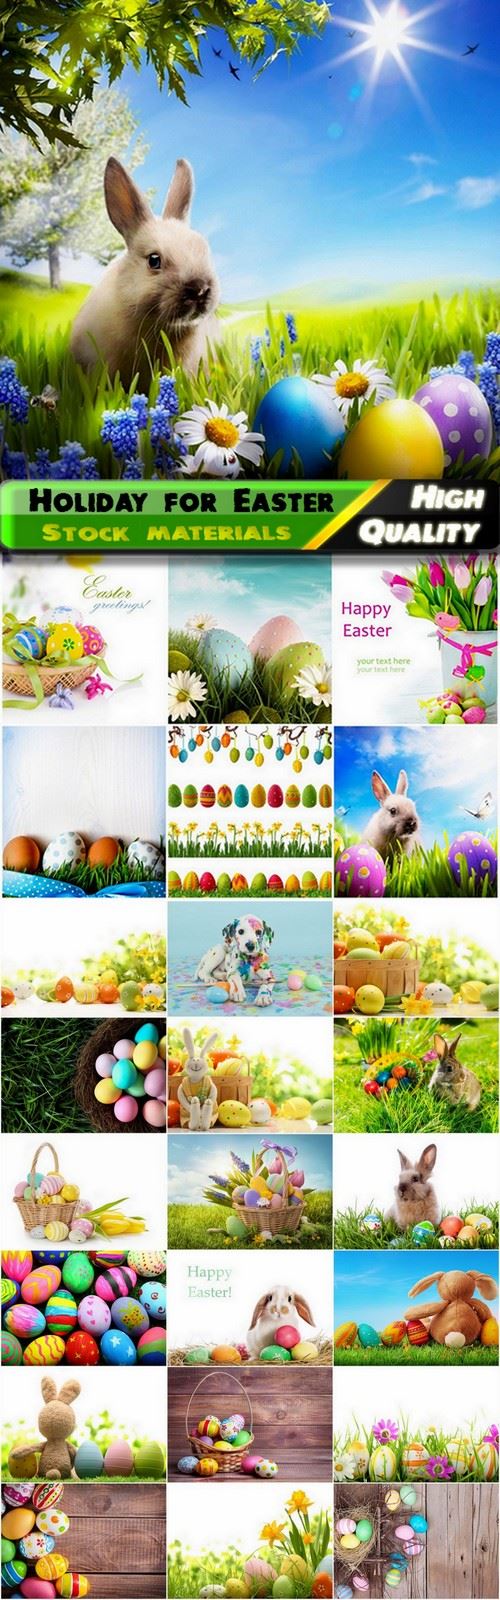 Holiday backgrounds with eggs and rabbits for Easter - 25 HQ Jpg